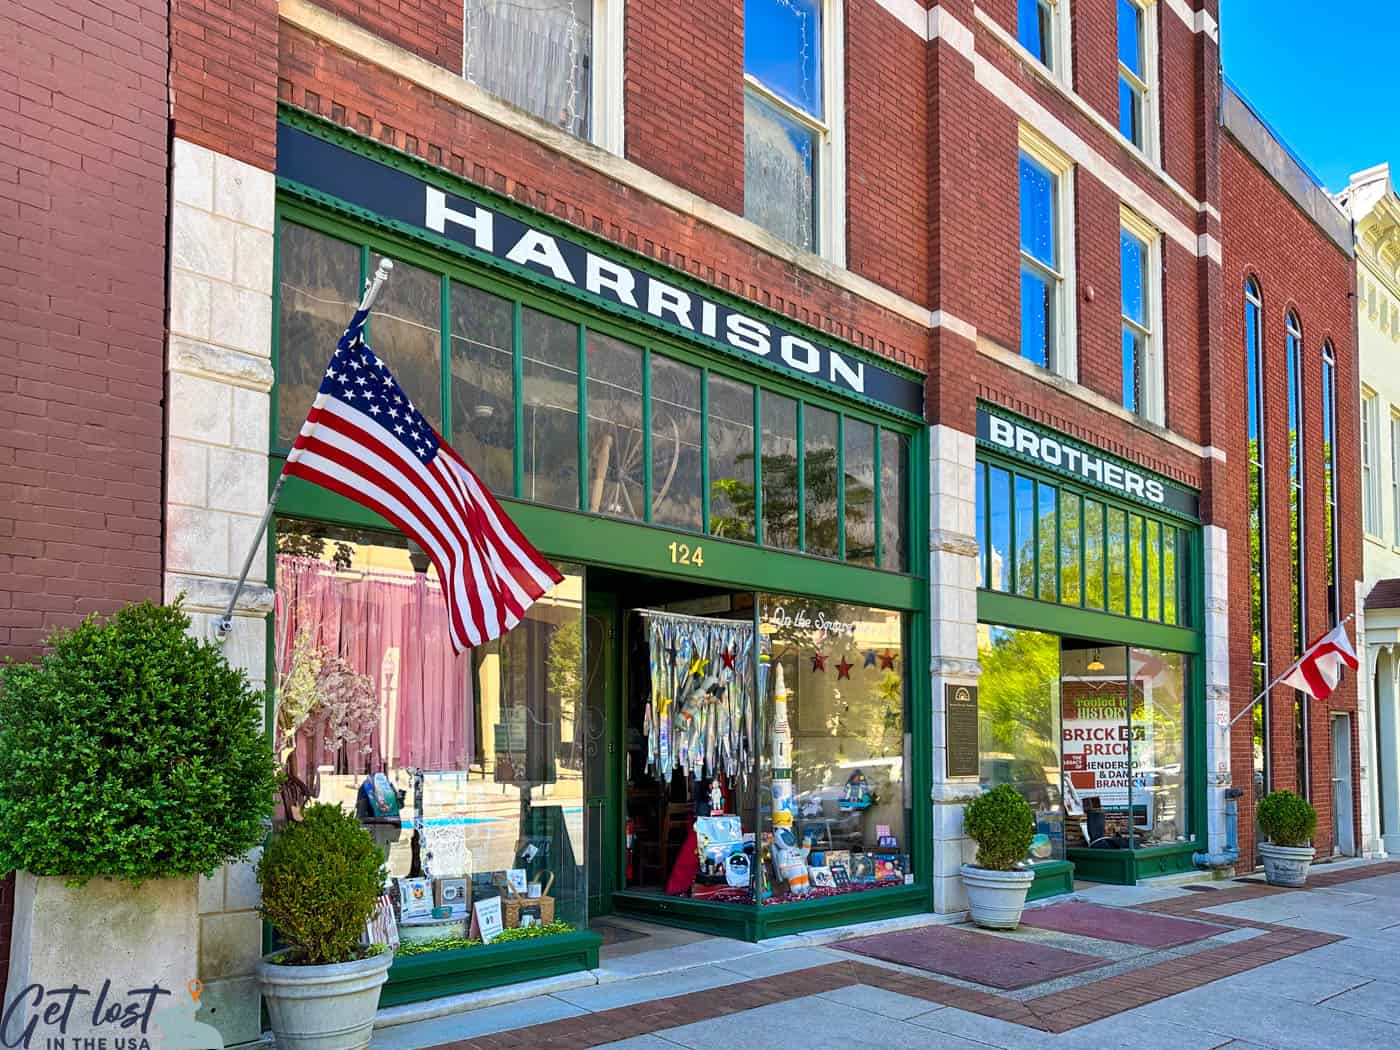 Harrison Brothers storefront